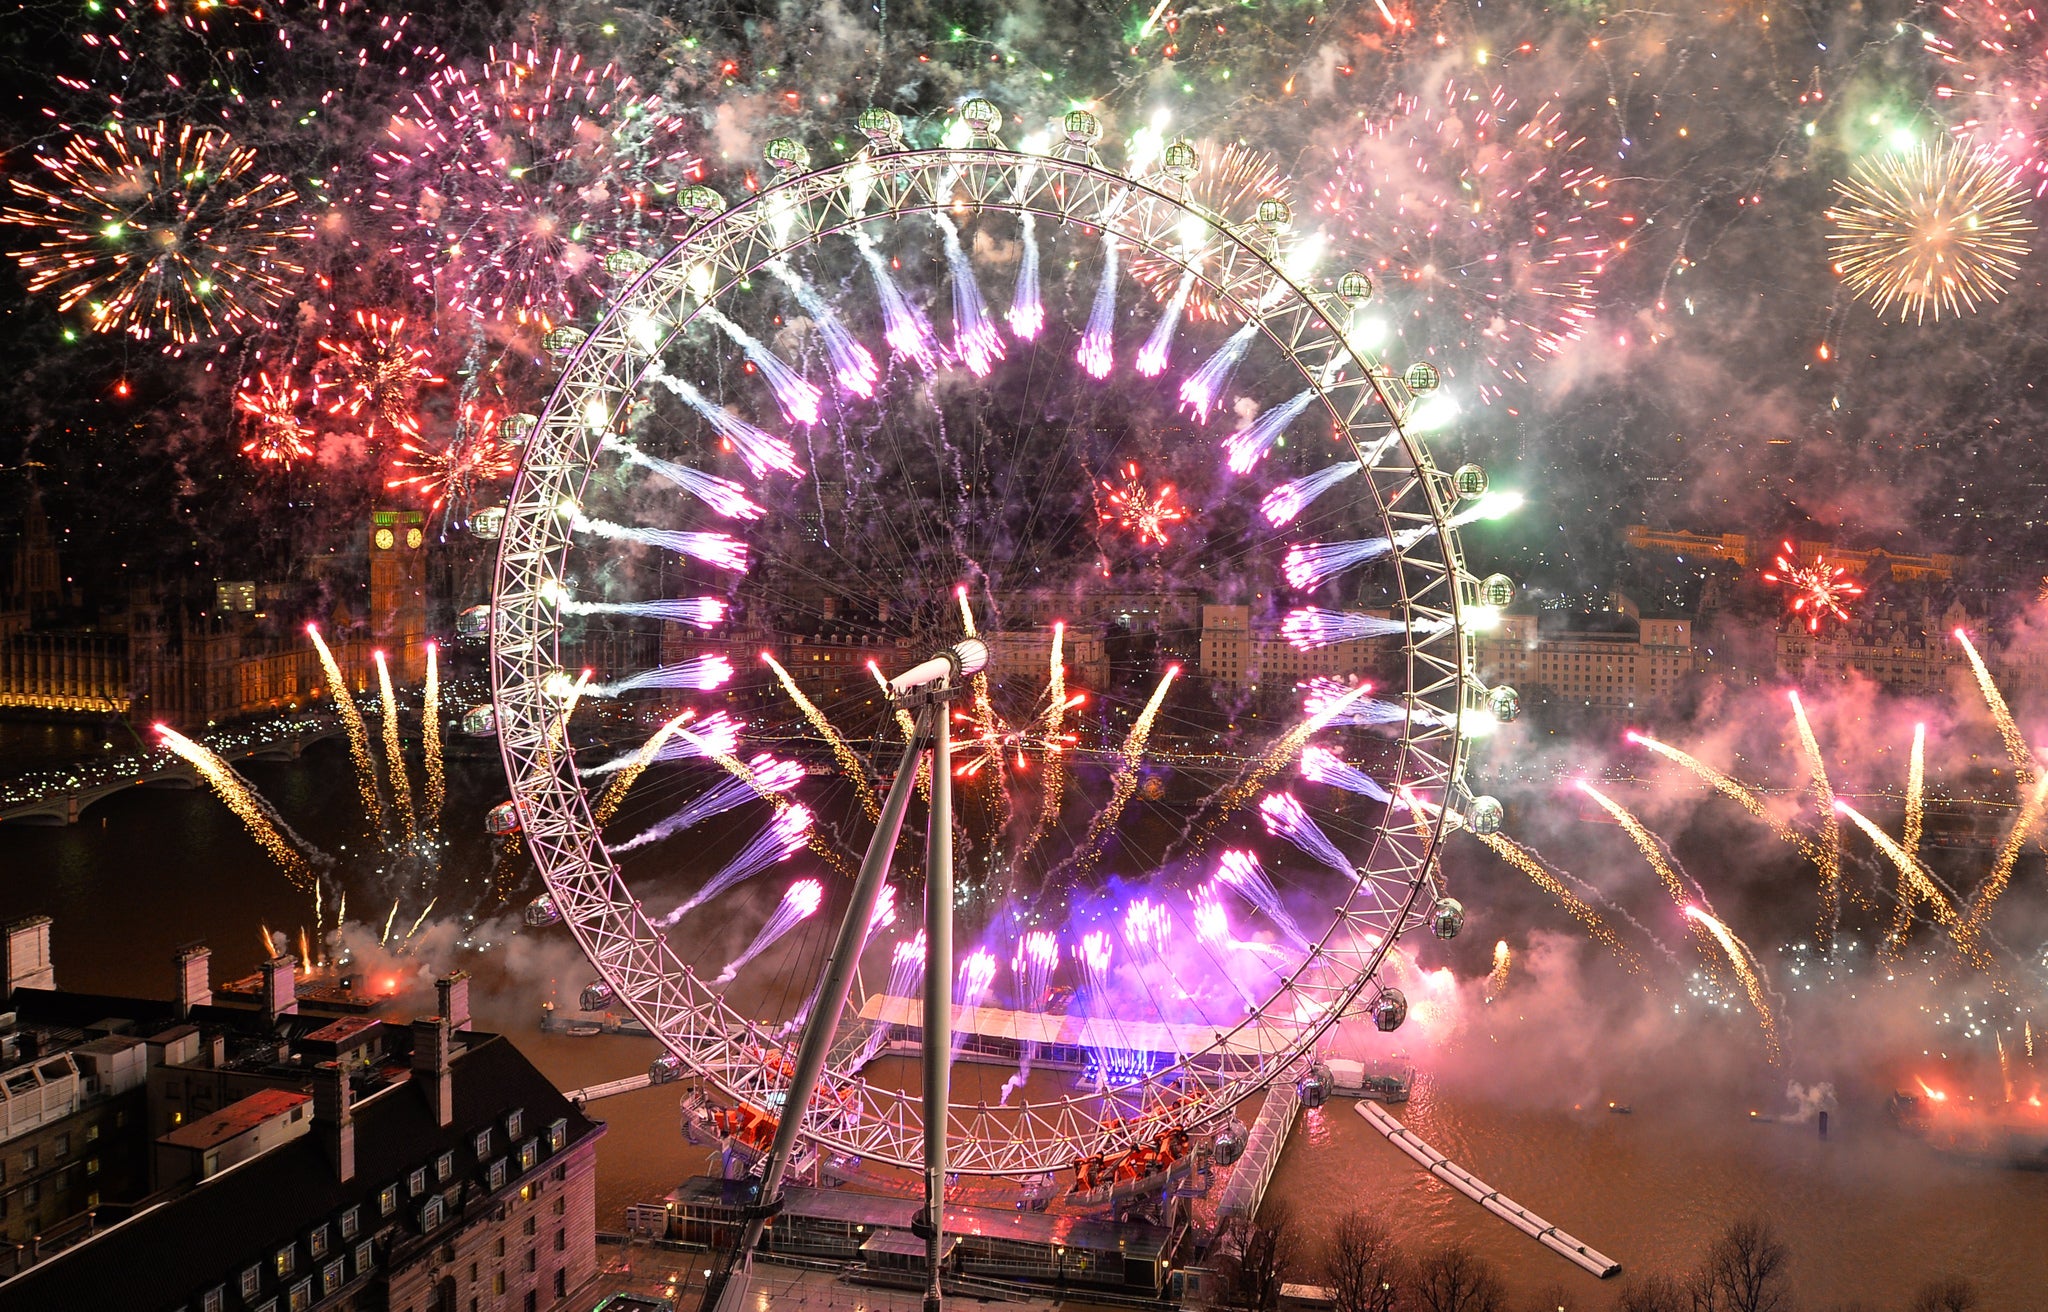 New Year S Eve Stay Away From Central London Unless You Have Fireworks Ticket Advise Police